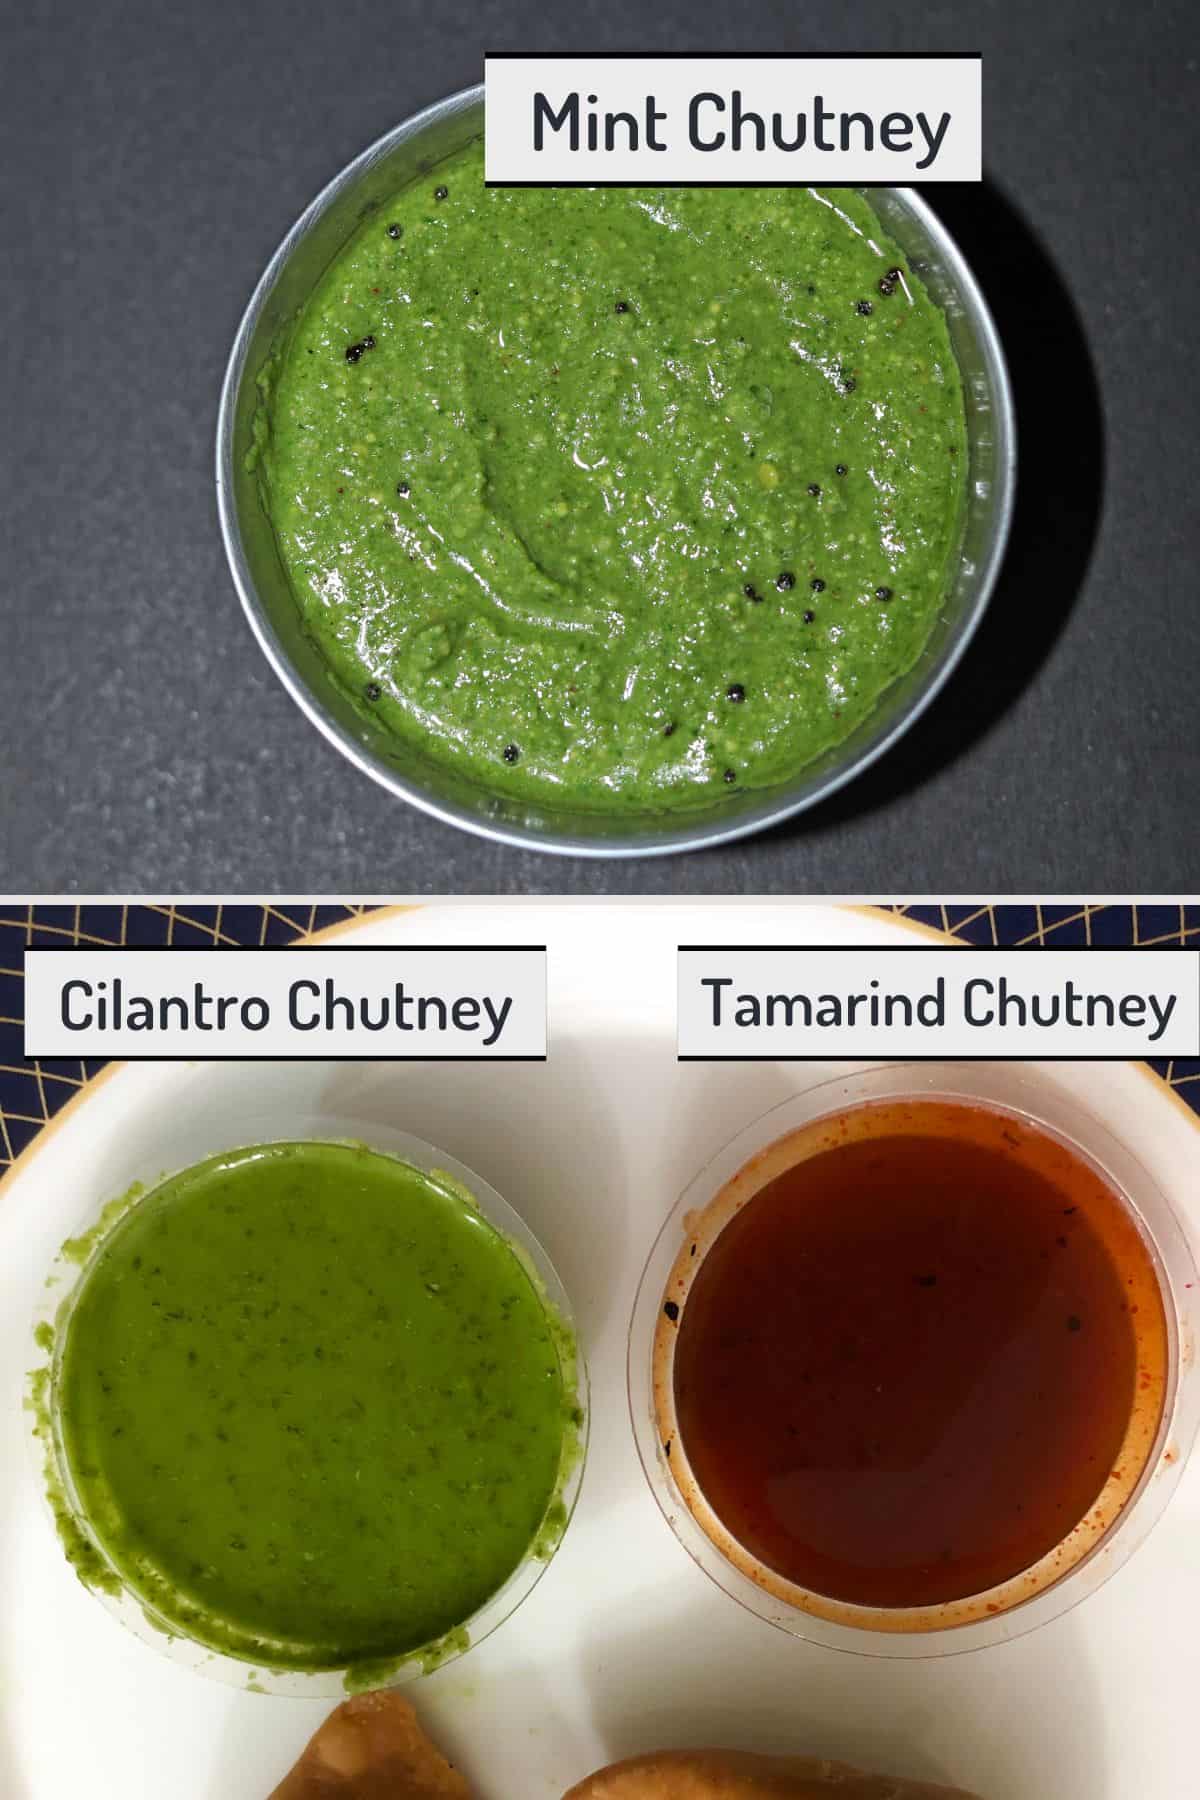 Collage showing mint chutney, cilantro chutney, and tamarind chutney with text overlay.